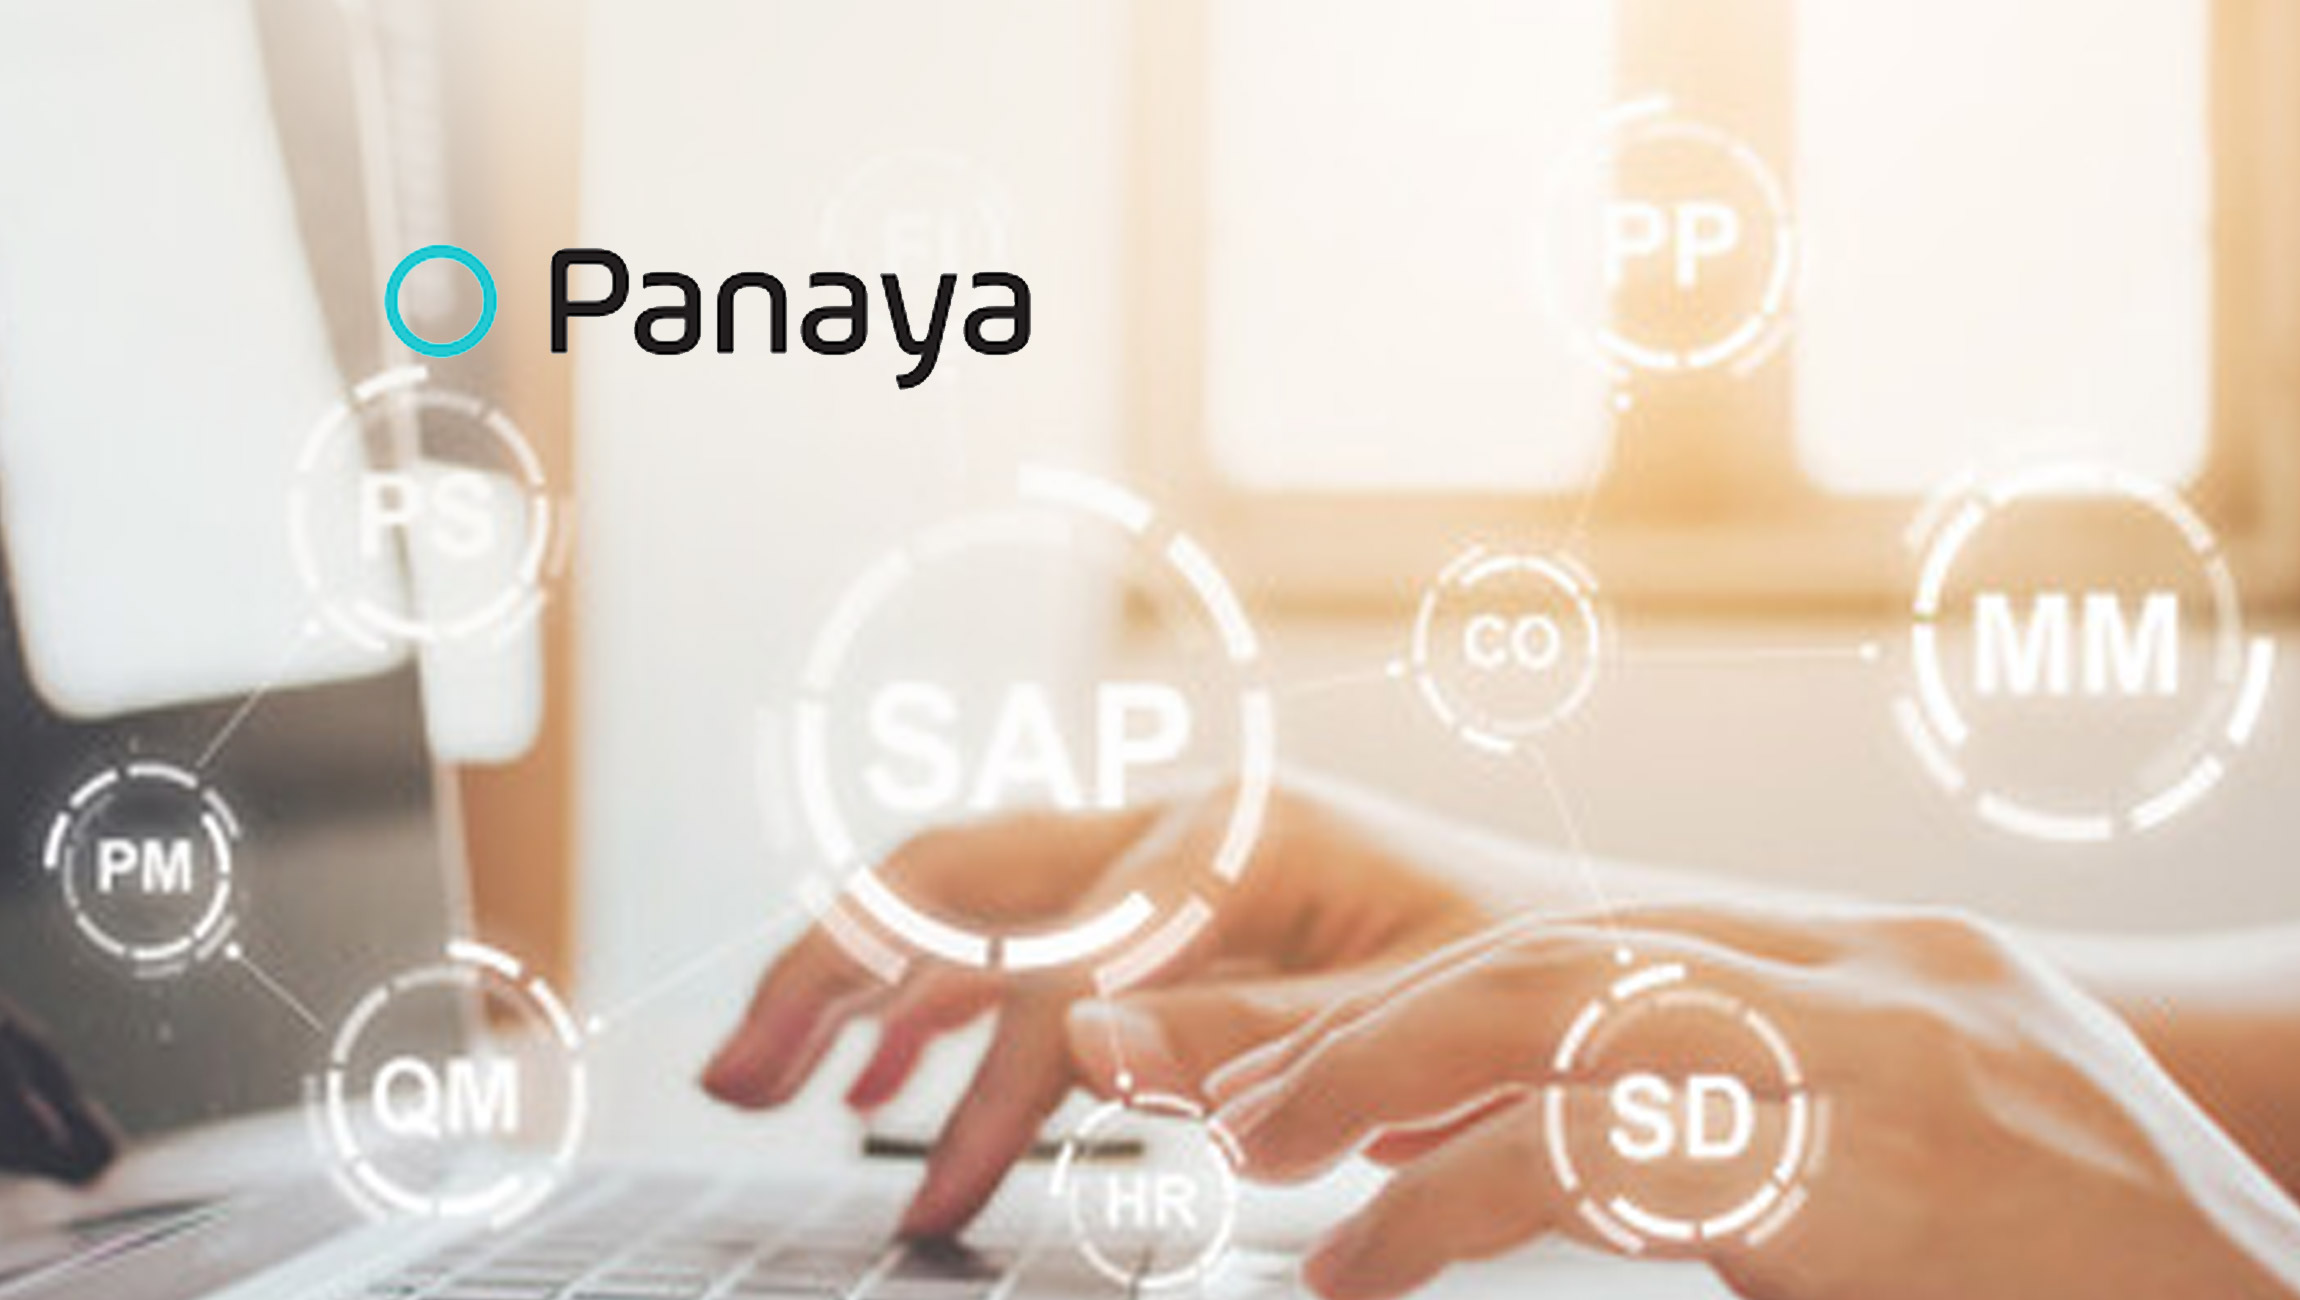 Panaya Announces a Complete S/4 360 Suite to Support SAP Customers on Their SAP S/4HANA Journey